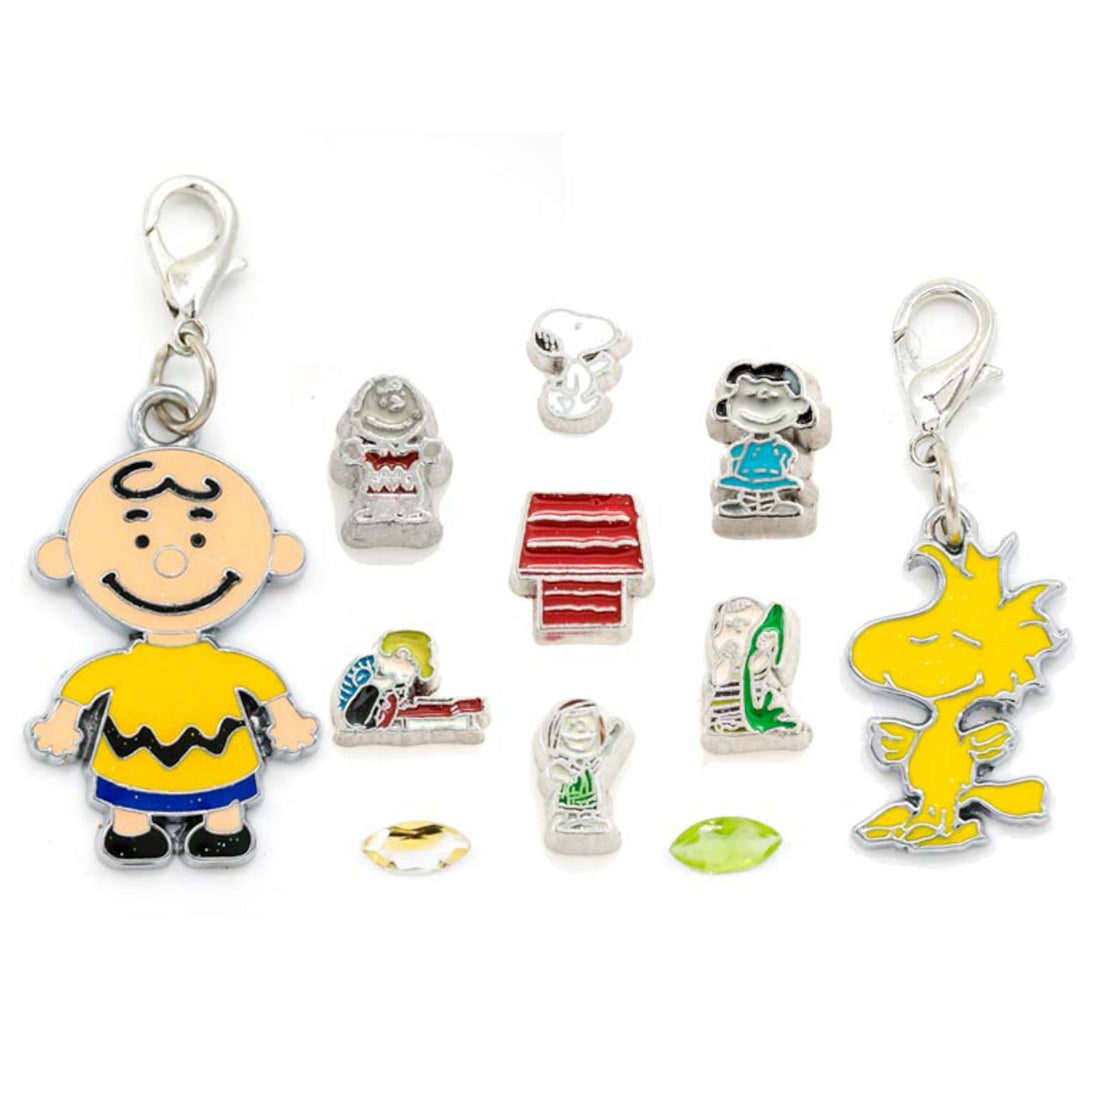 Charm Drop Cacahuetes Charlie Brown Snoopy